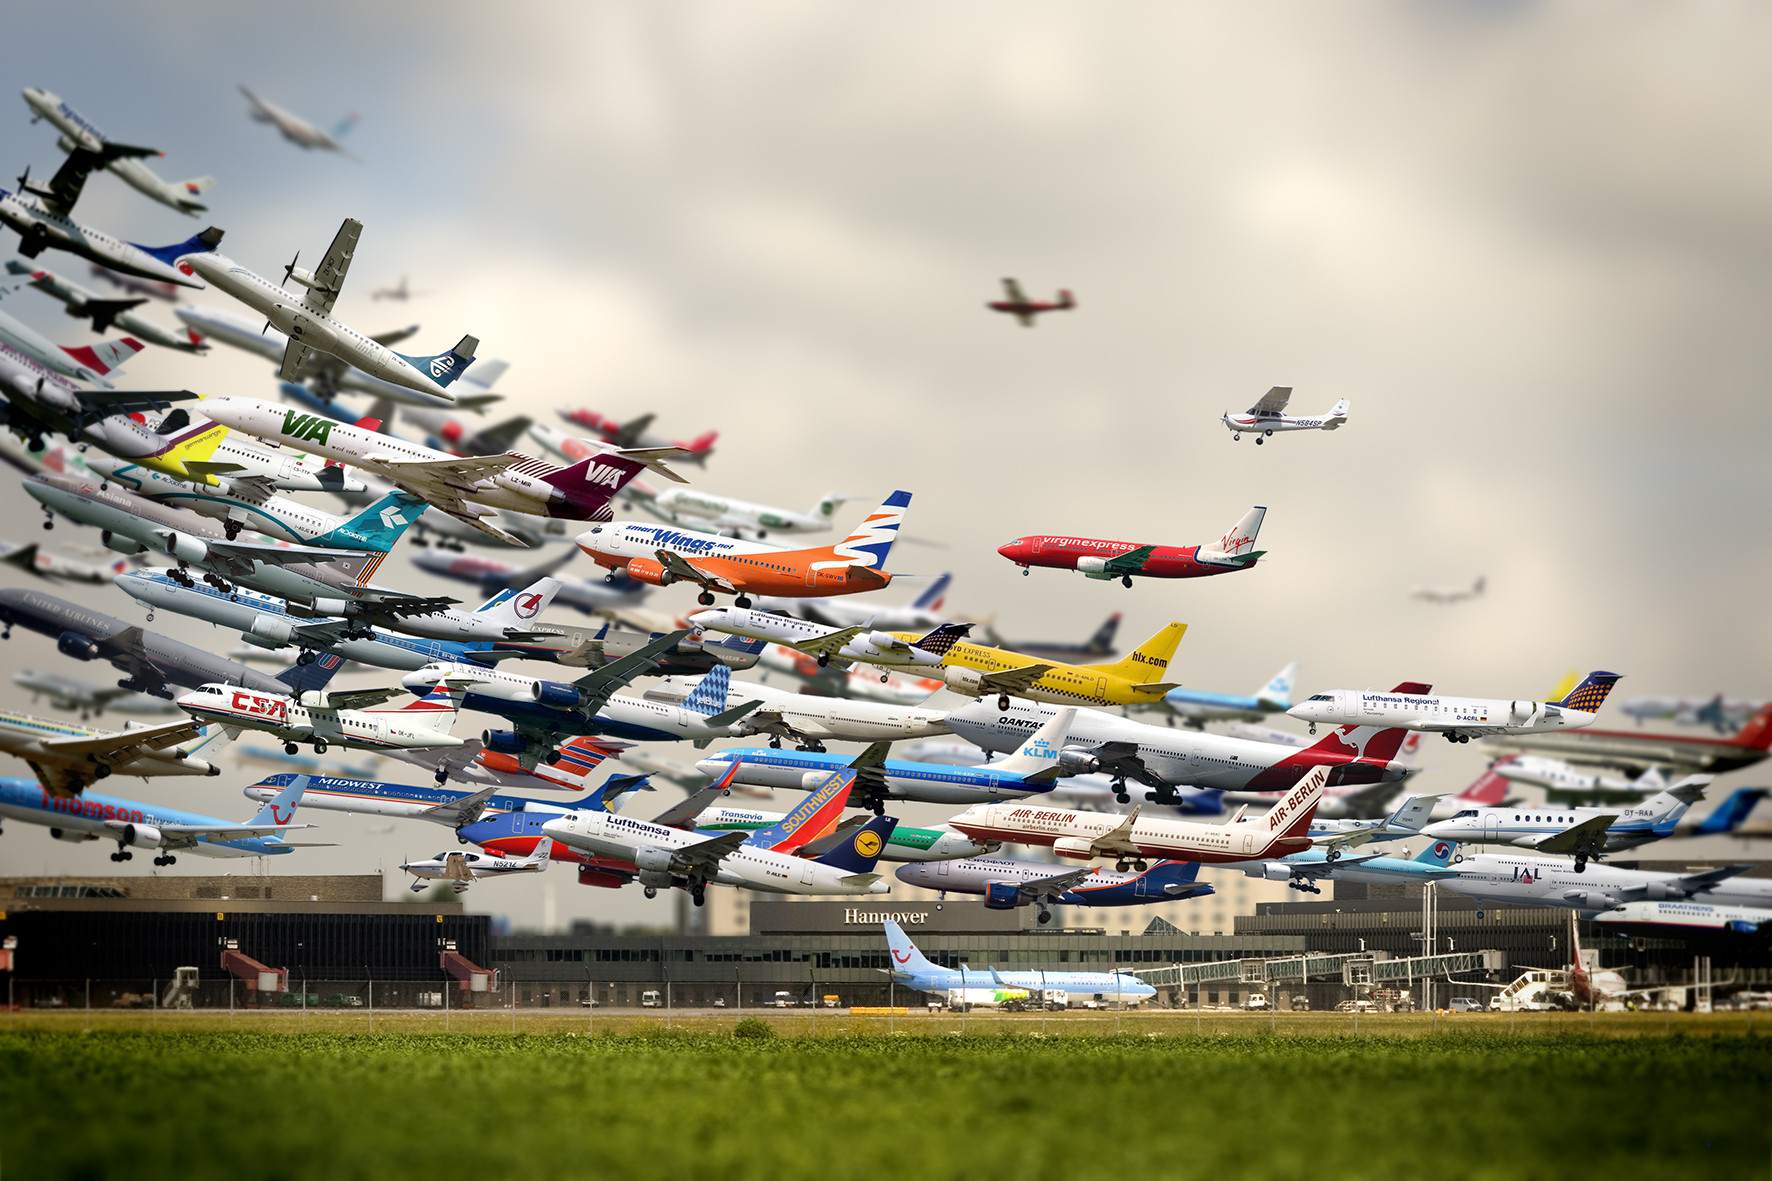 Composite image of planes taking off